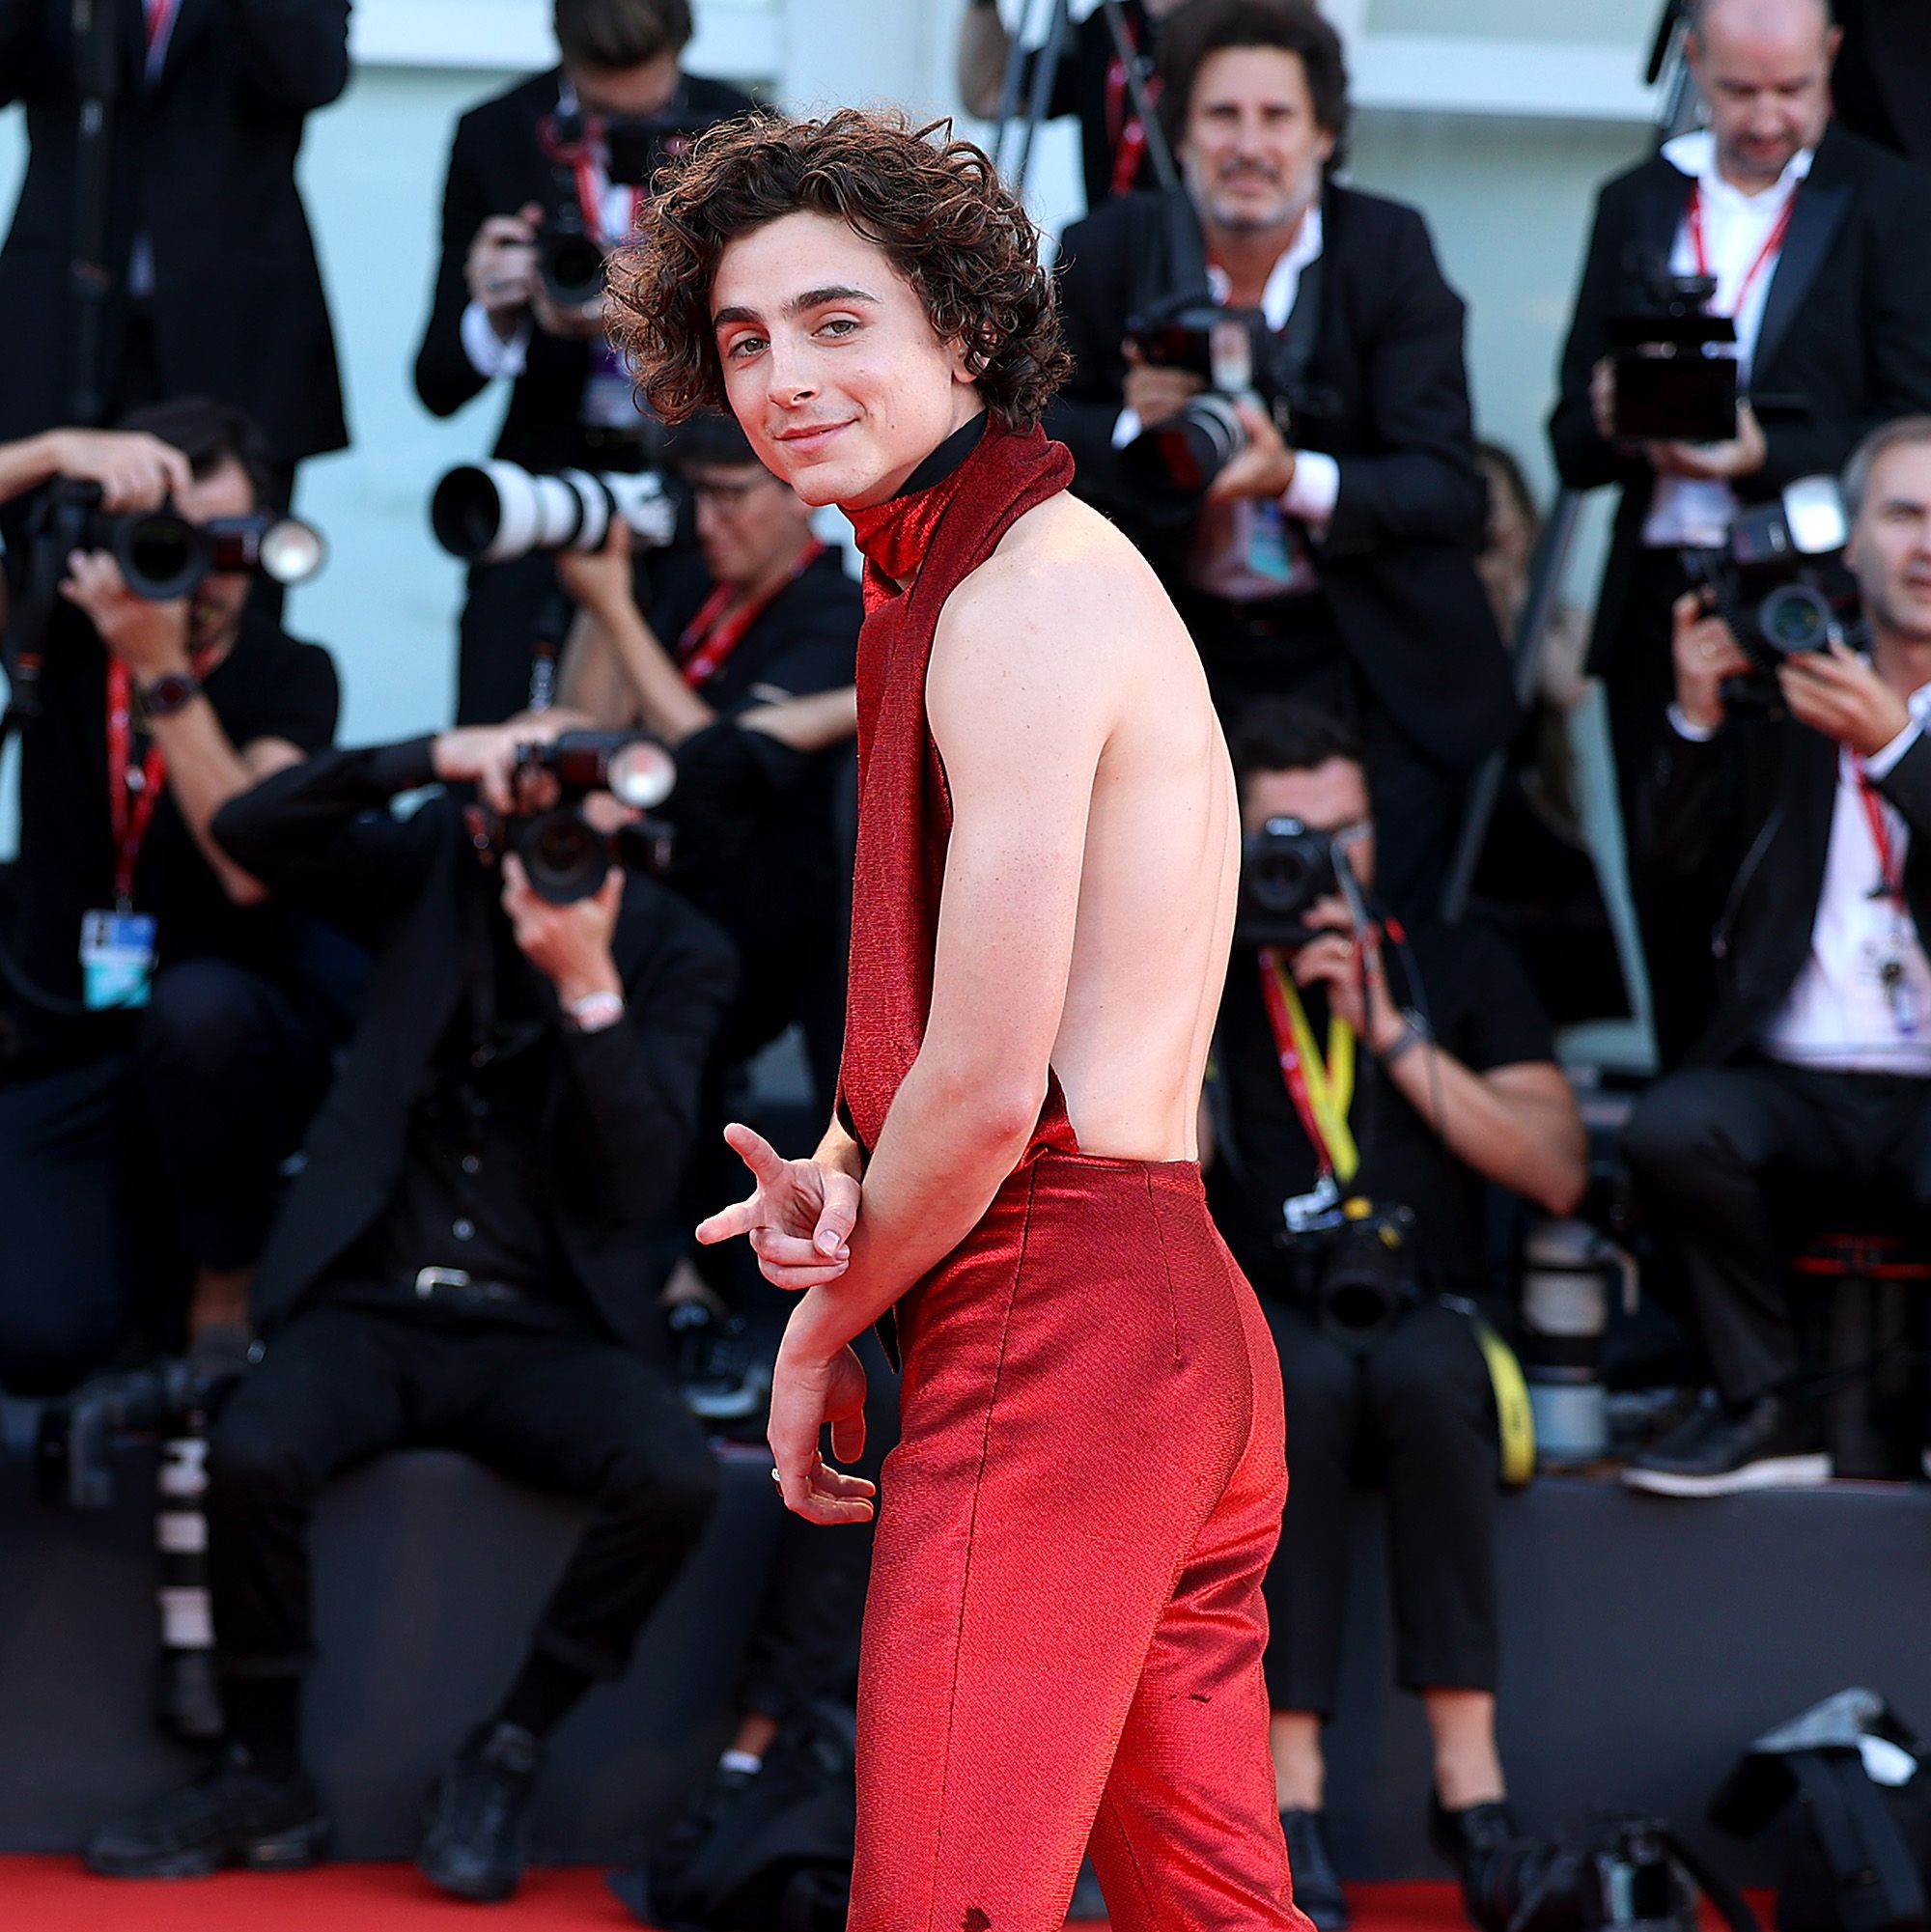 Fans Think Timothée Chalamet Was at the Kardashian Christmas Party Based on a Blurry Photo